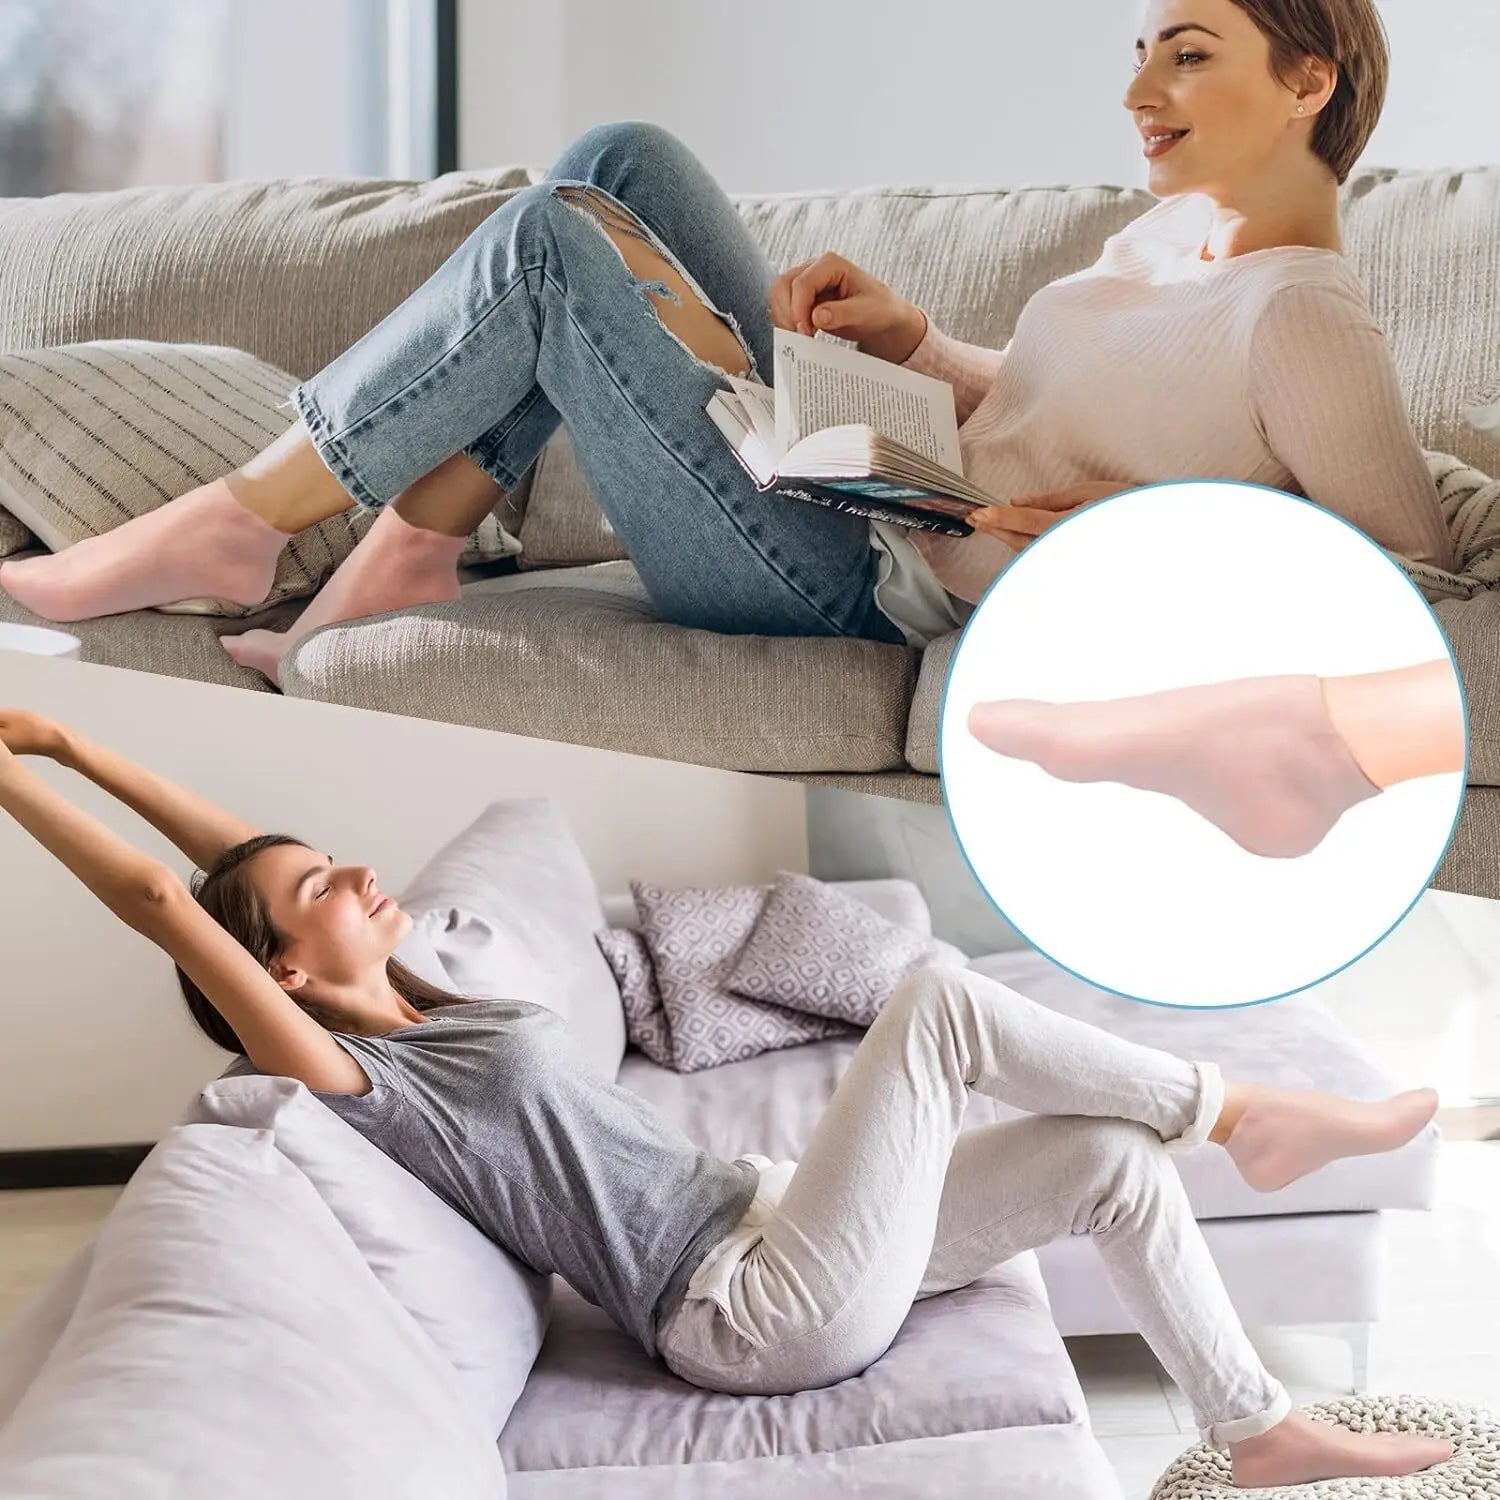 Silicone Foot Care Socks - Givemethisnow